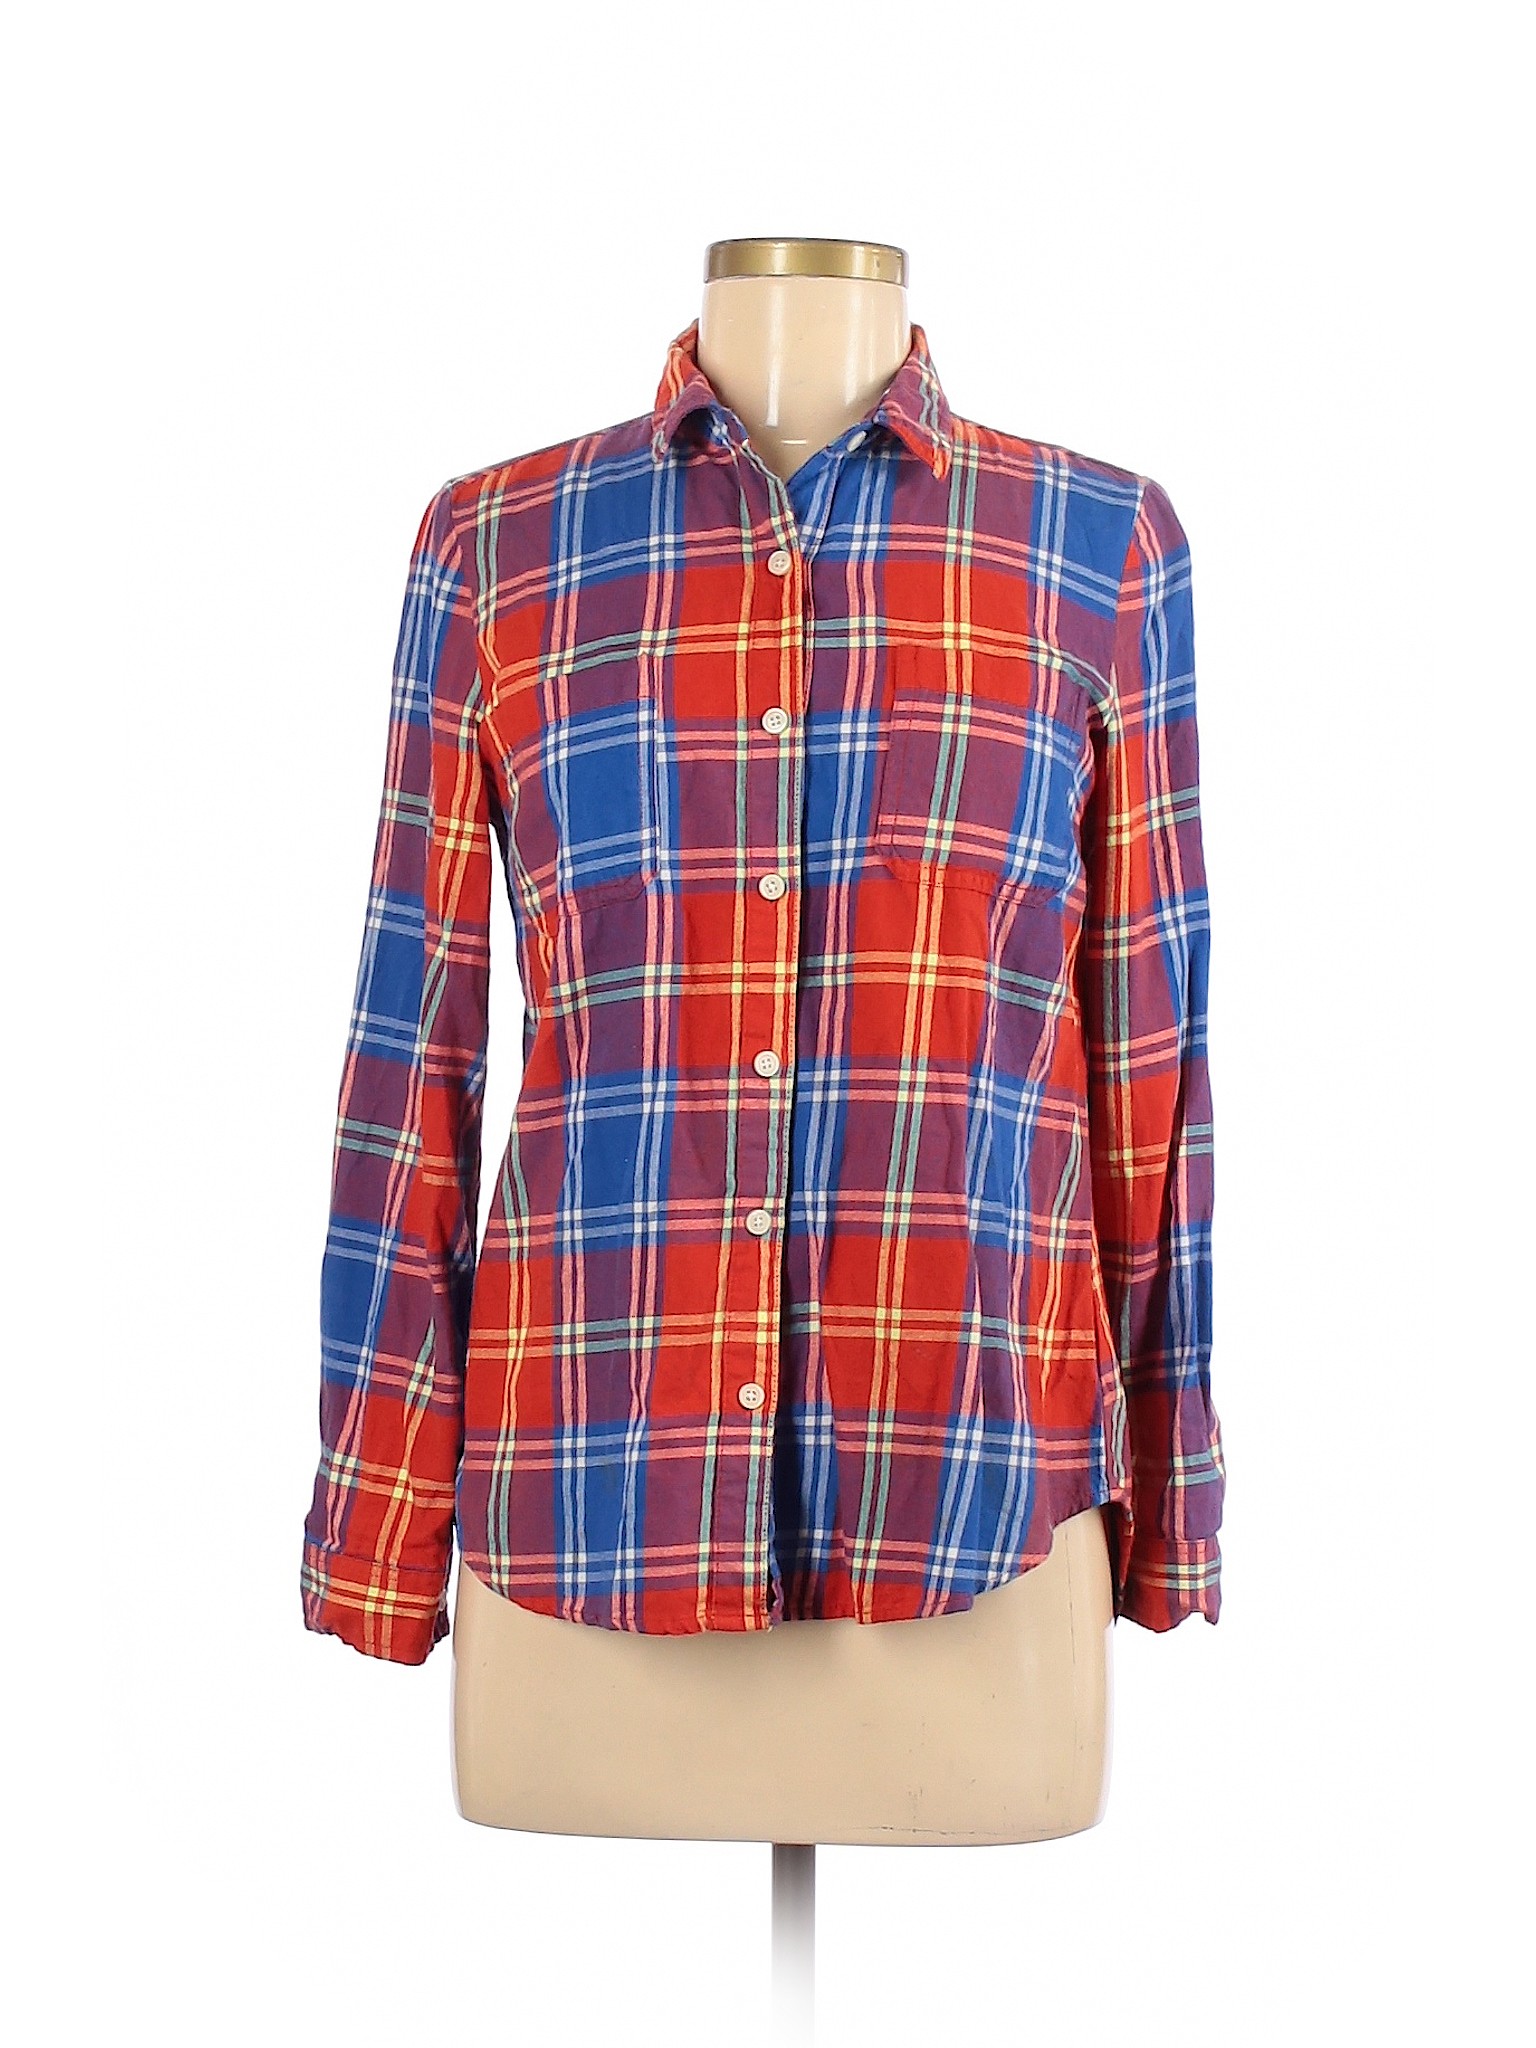 Old Navy Women Red Long Sleeve Button-Down Shirt S | eBay